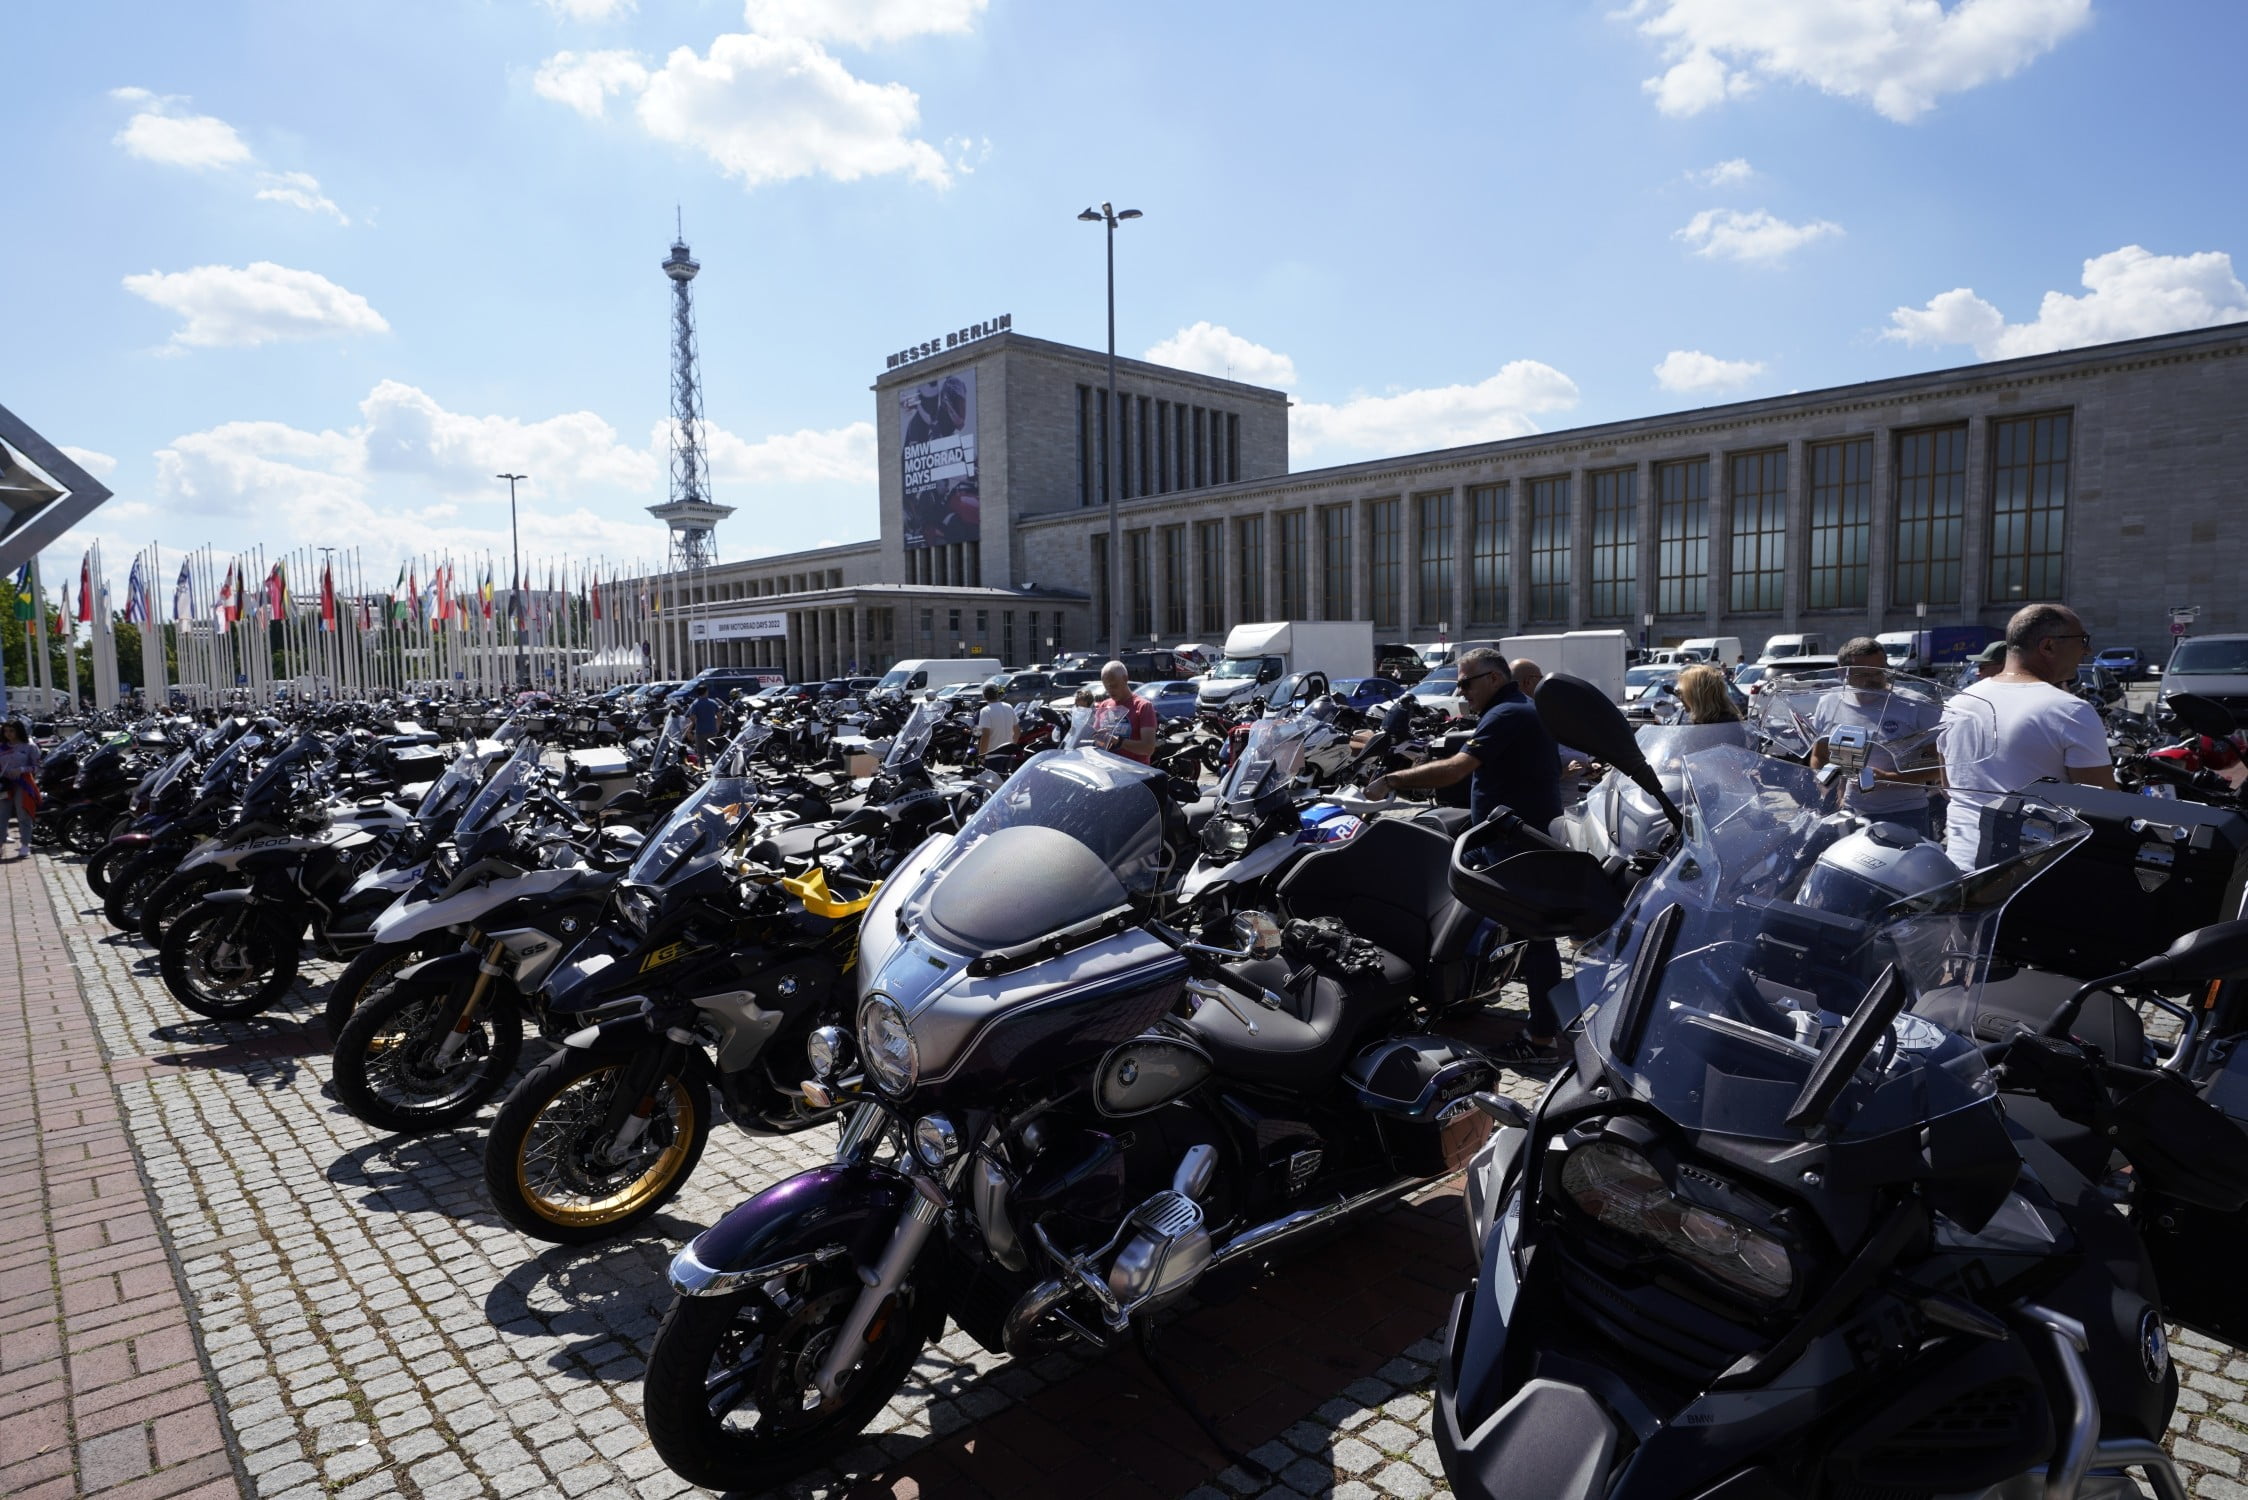 BMW Motorrad weekend in Berlin: Pure&Crafted Festival (July 1, 2022) and BMW Motorrad Days (July 2&3, 2022)